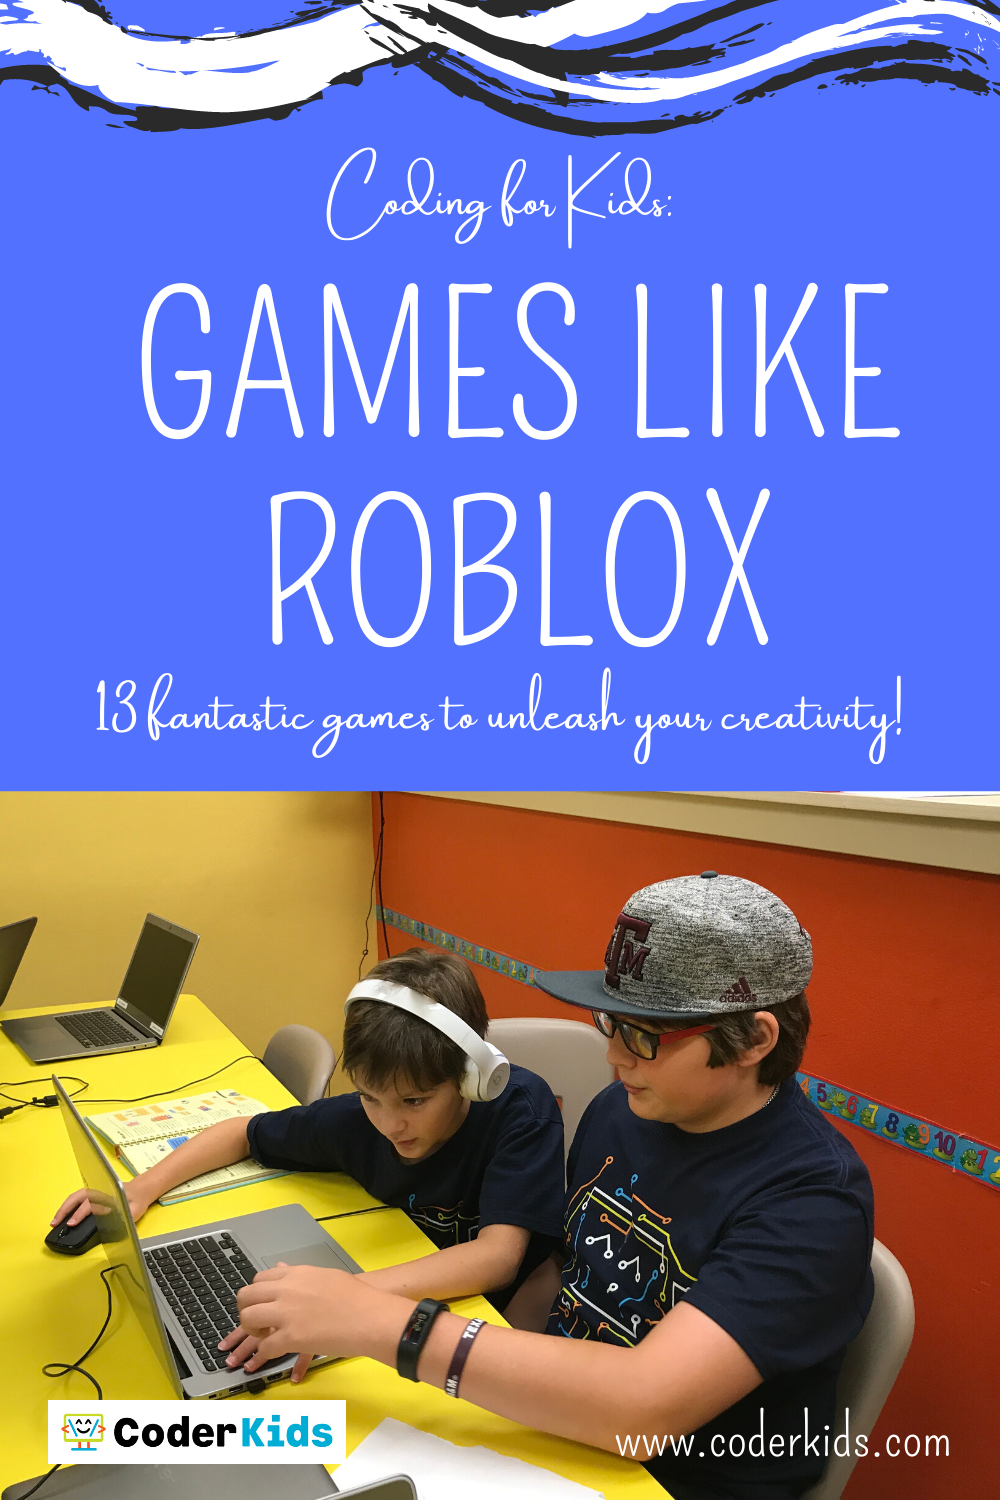 Games Like Roblox Coder Kids Houston Online Classes - free the ultimate roblox book an unofficial guide learn how to build your own worlds